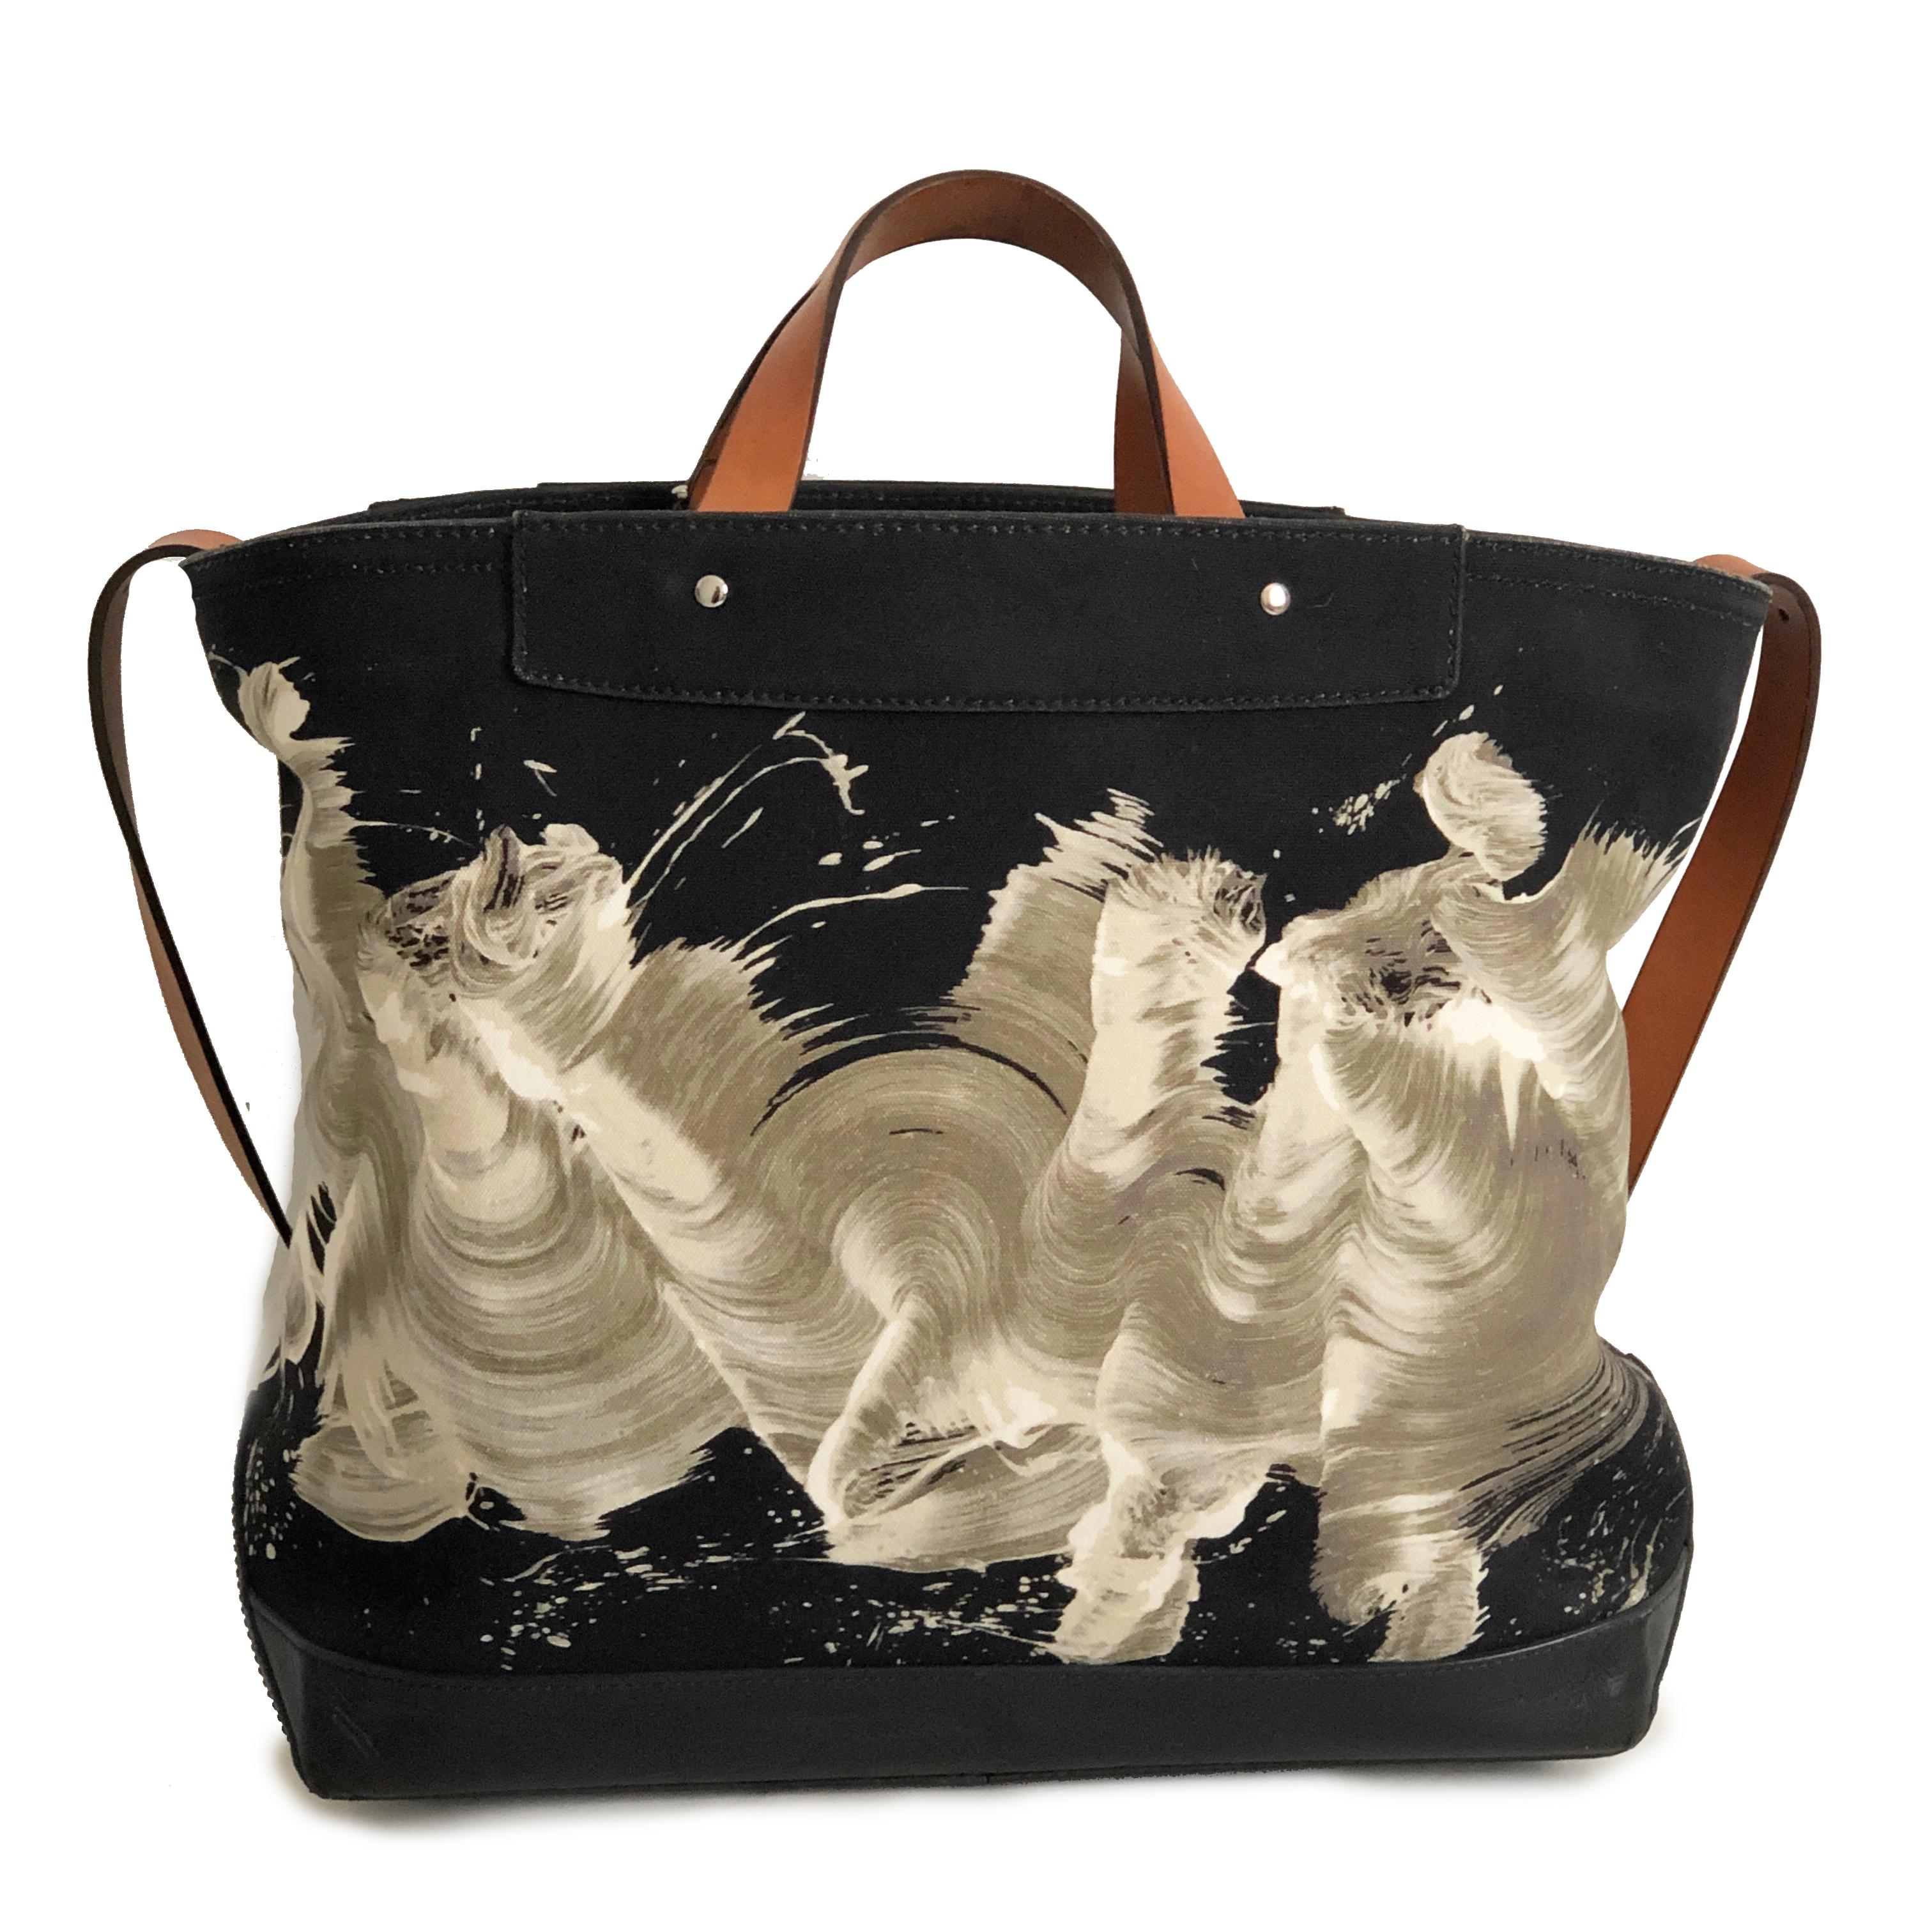 Beige Limited Edition Coach x James Nares Large Brushstroke Tote Bag Canvas Leather 